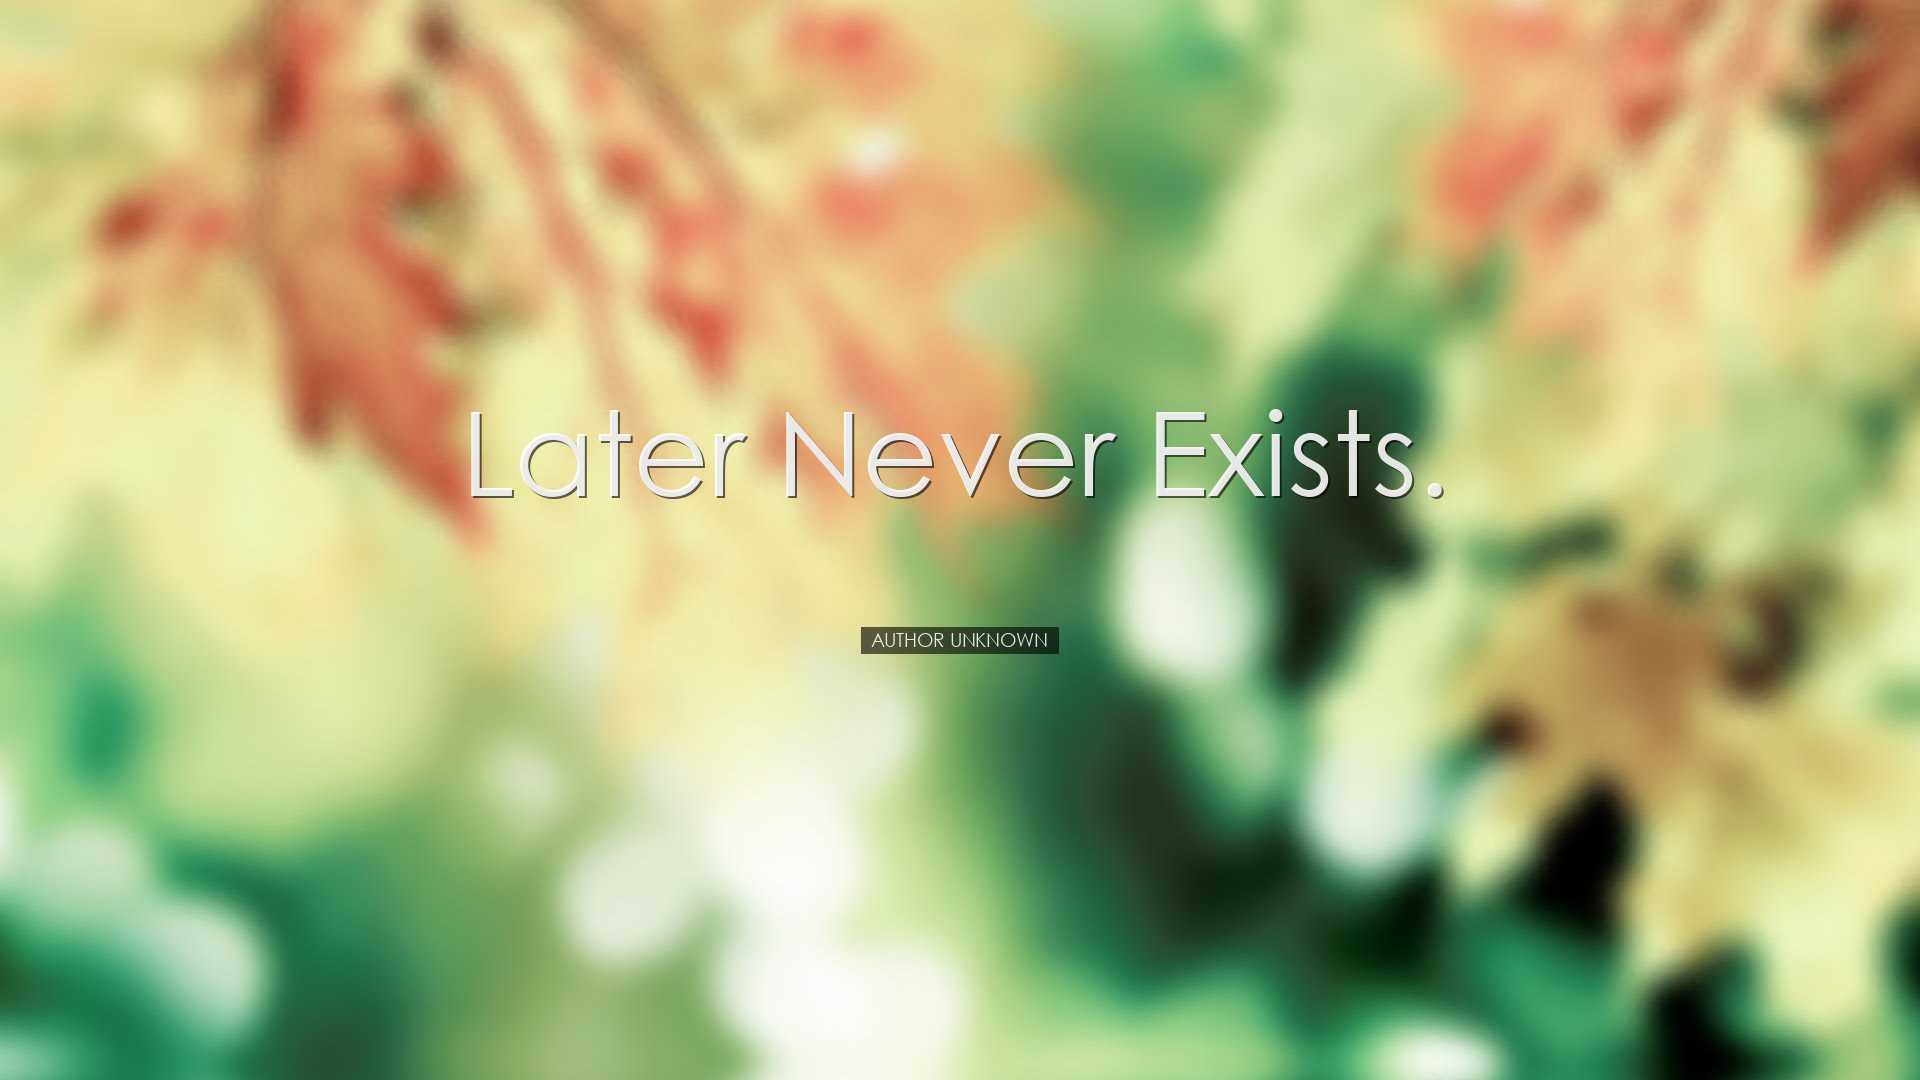 Later never exists. - Author Unknown